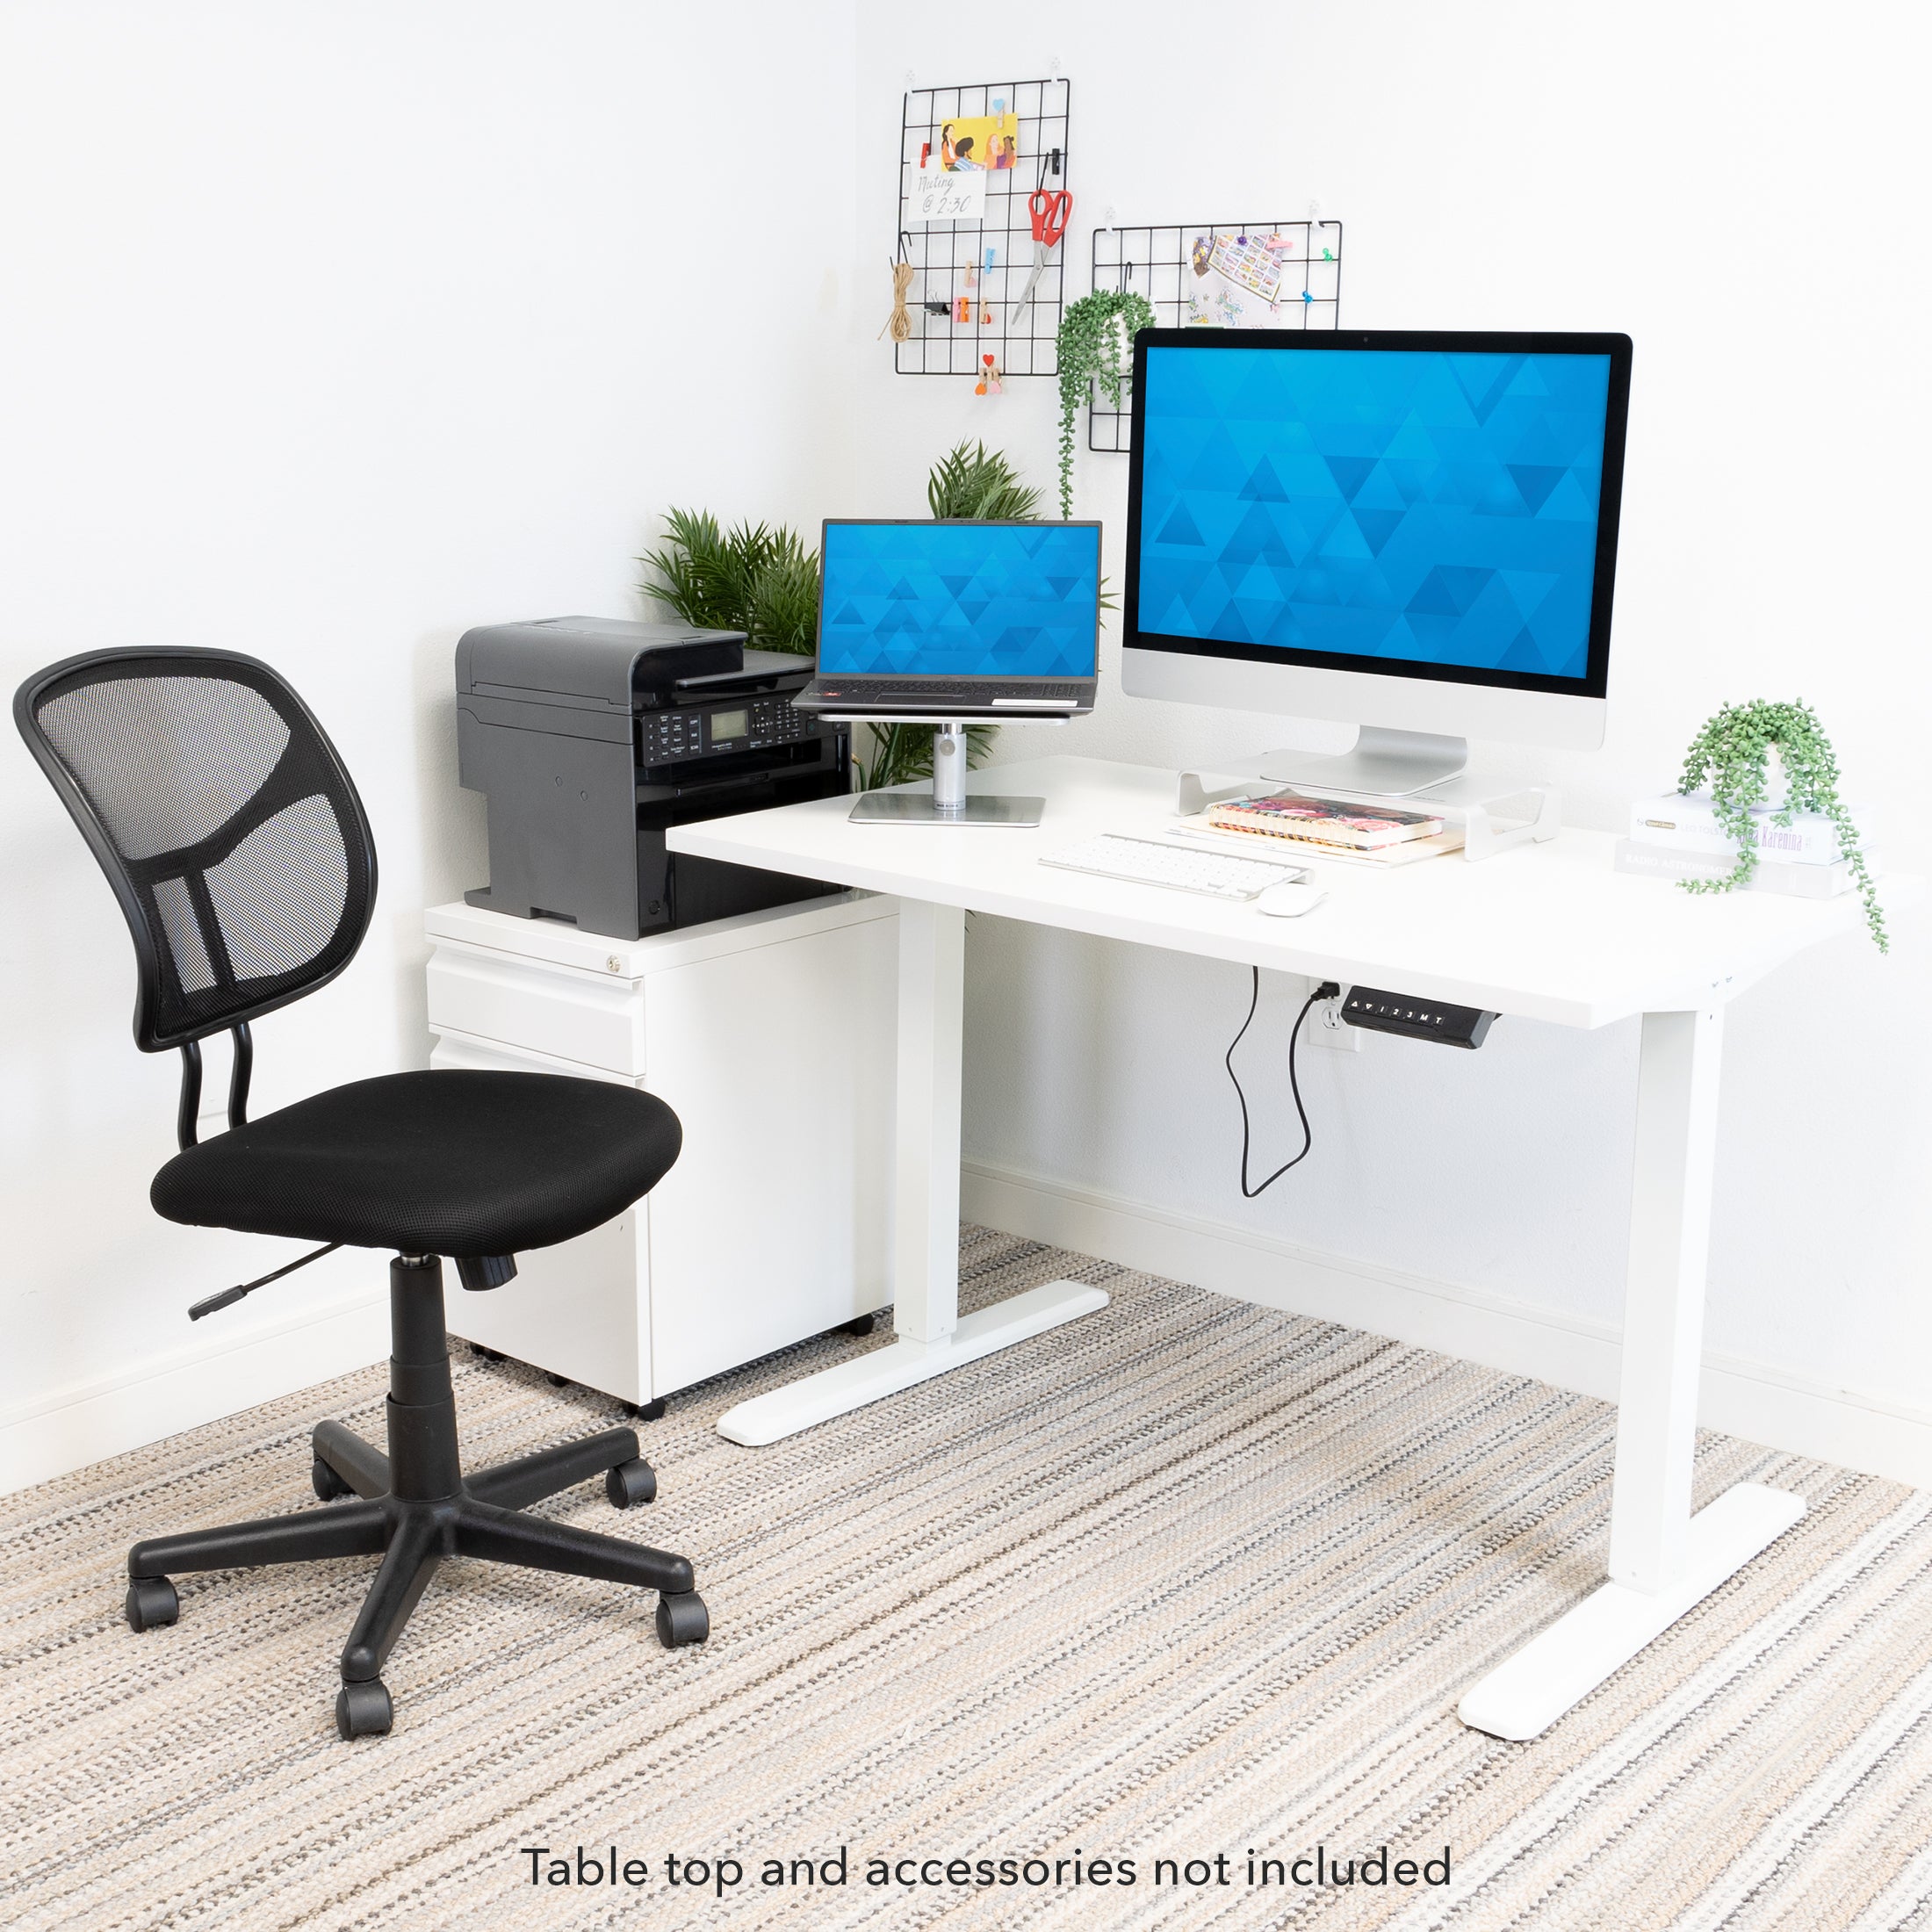 Electric Sit-Stand Desk Frame